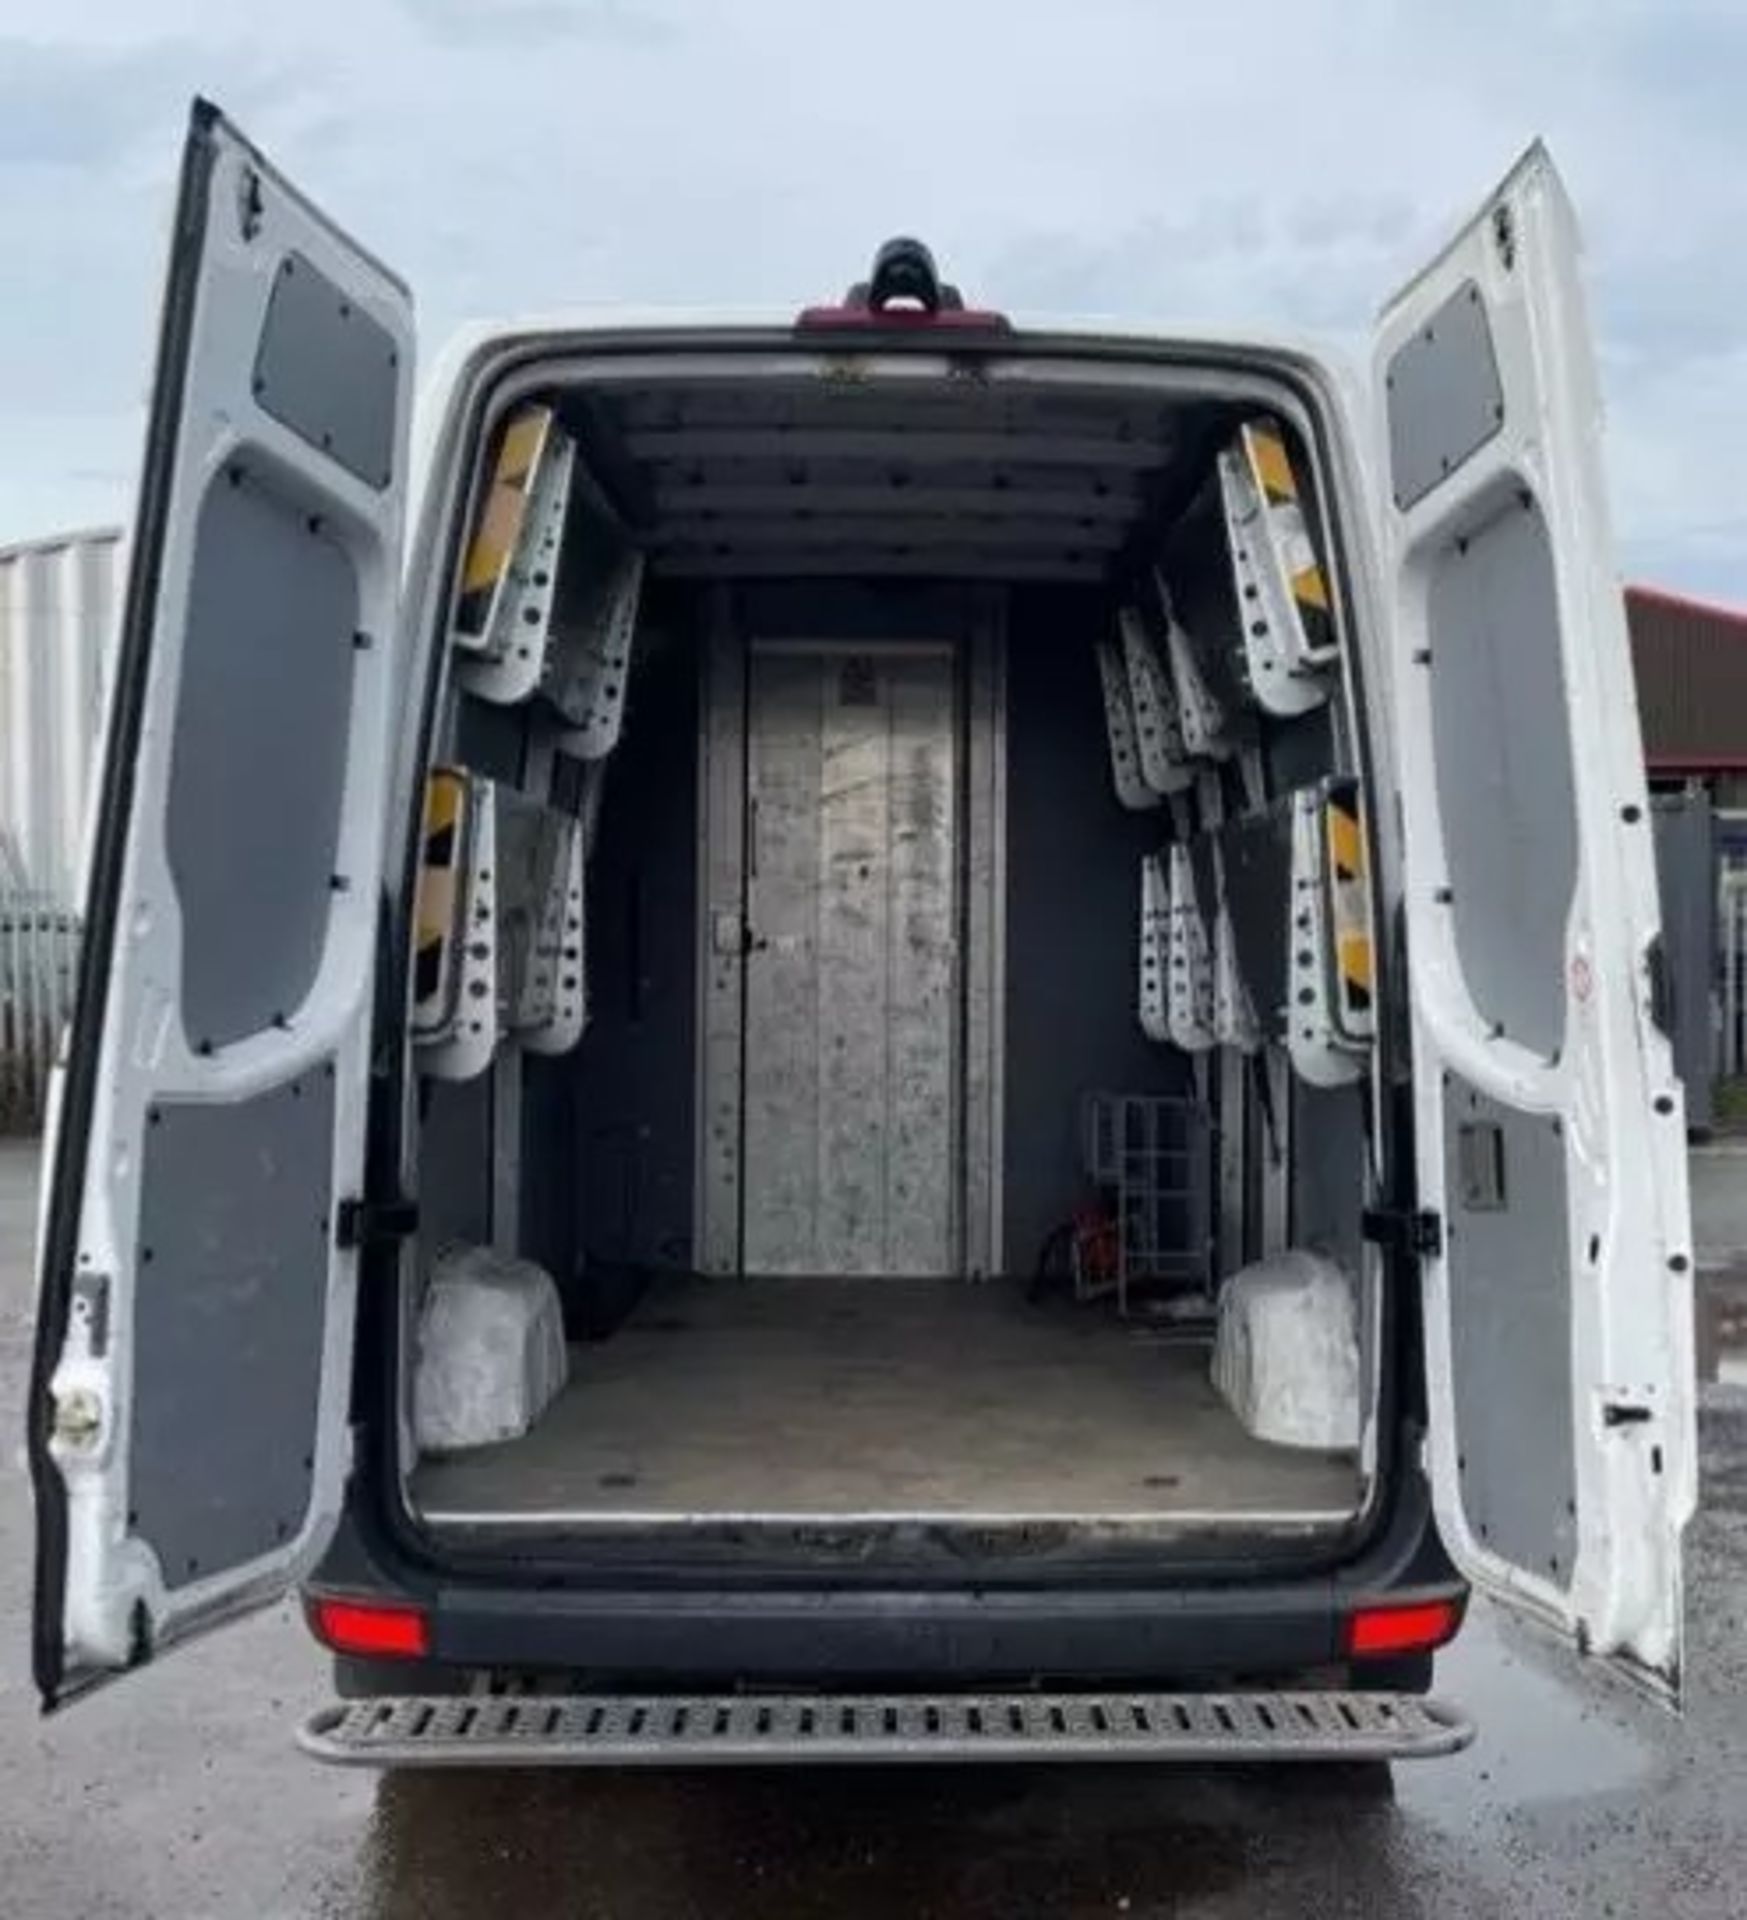 MERCEDES-BENZ SPRINTER 2013 - DIRECT FROM FEDEX, IDEAL FOR HEAVY DUTY - Image 11 of 13